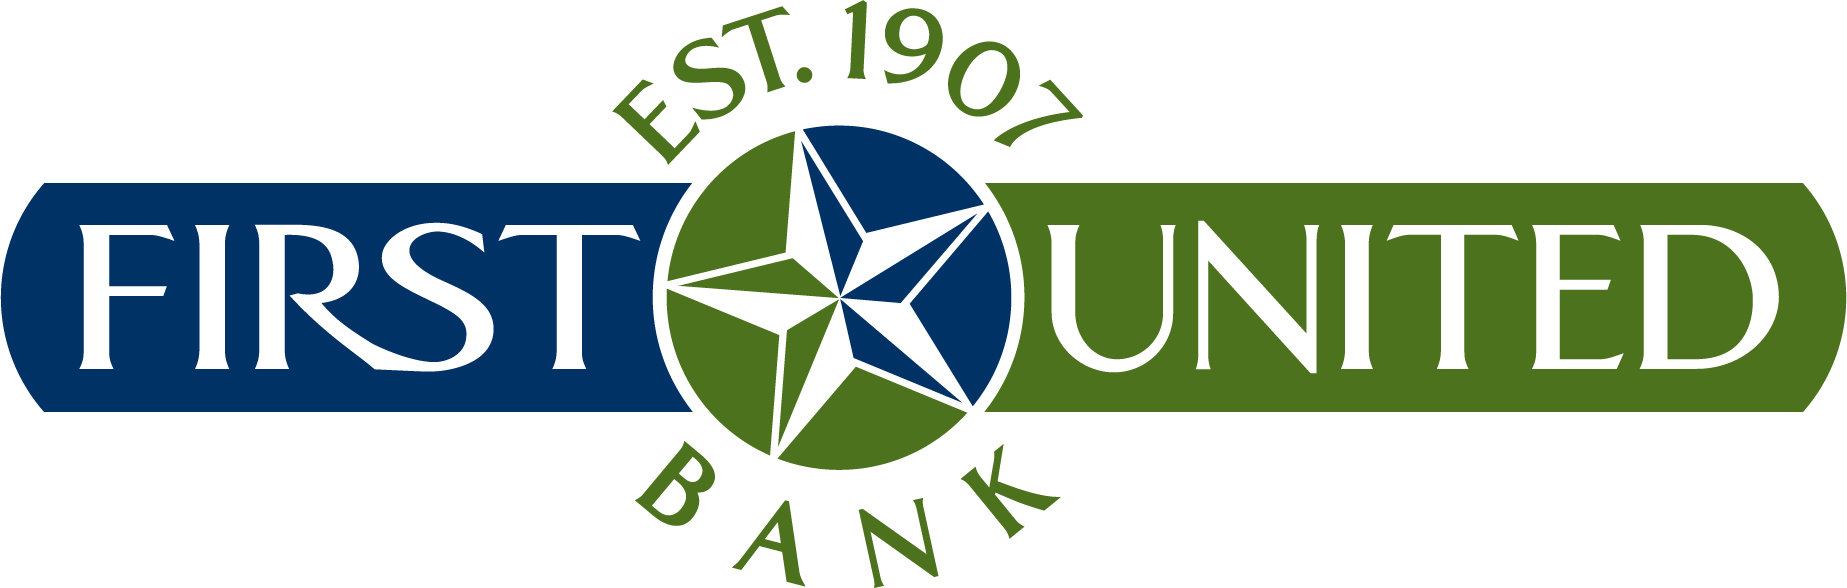 First United Bank Lubbock